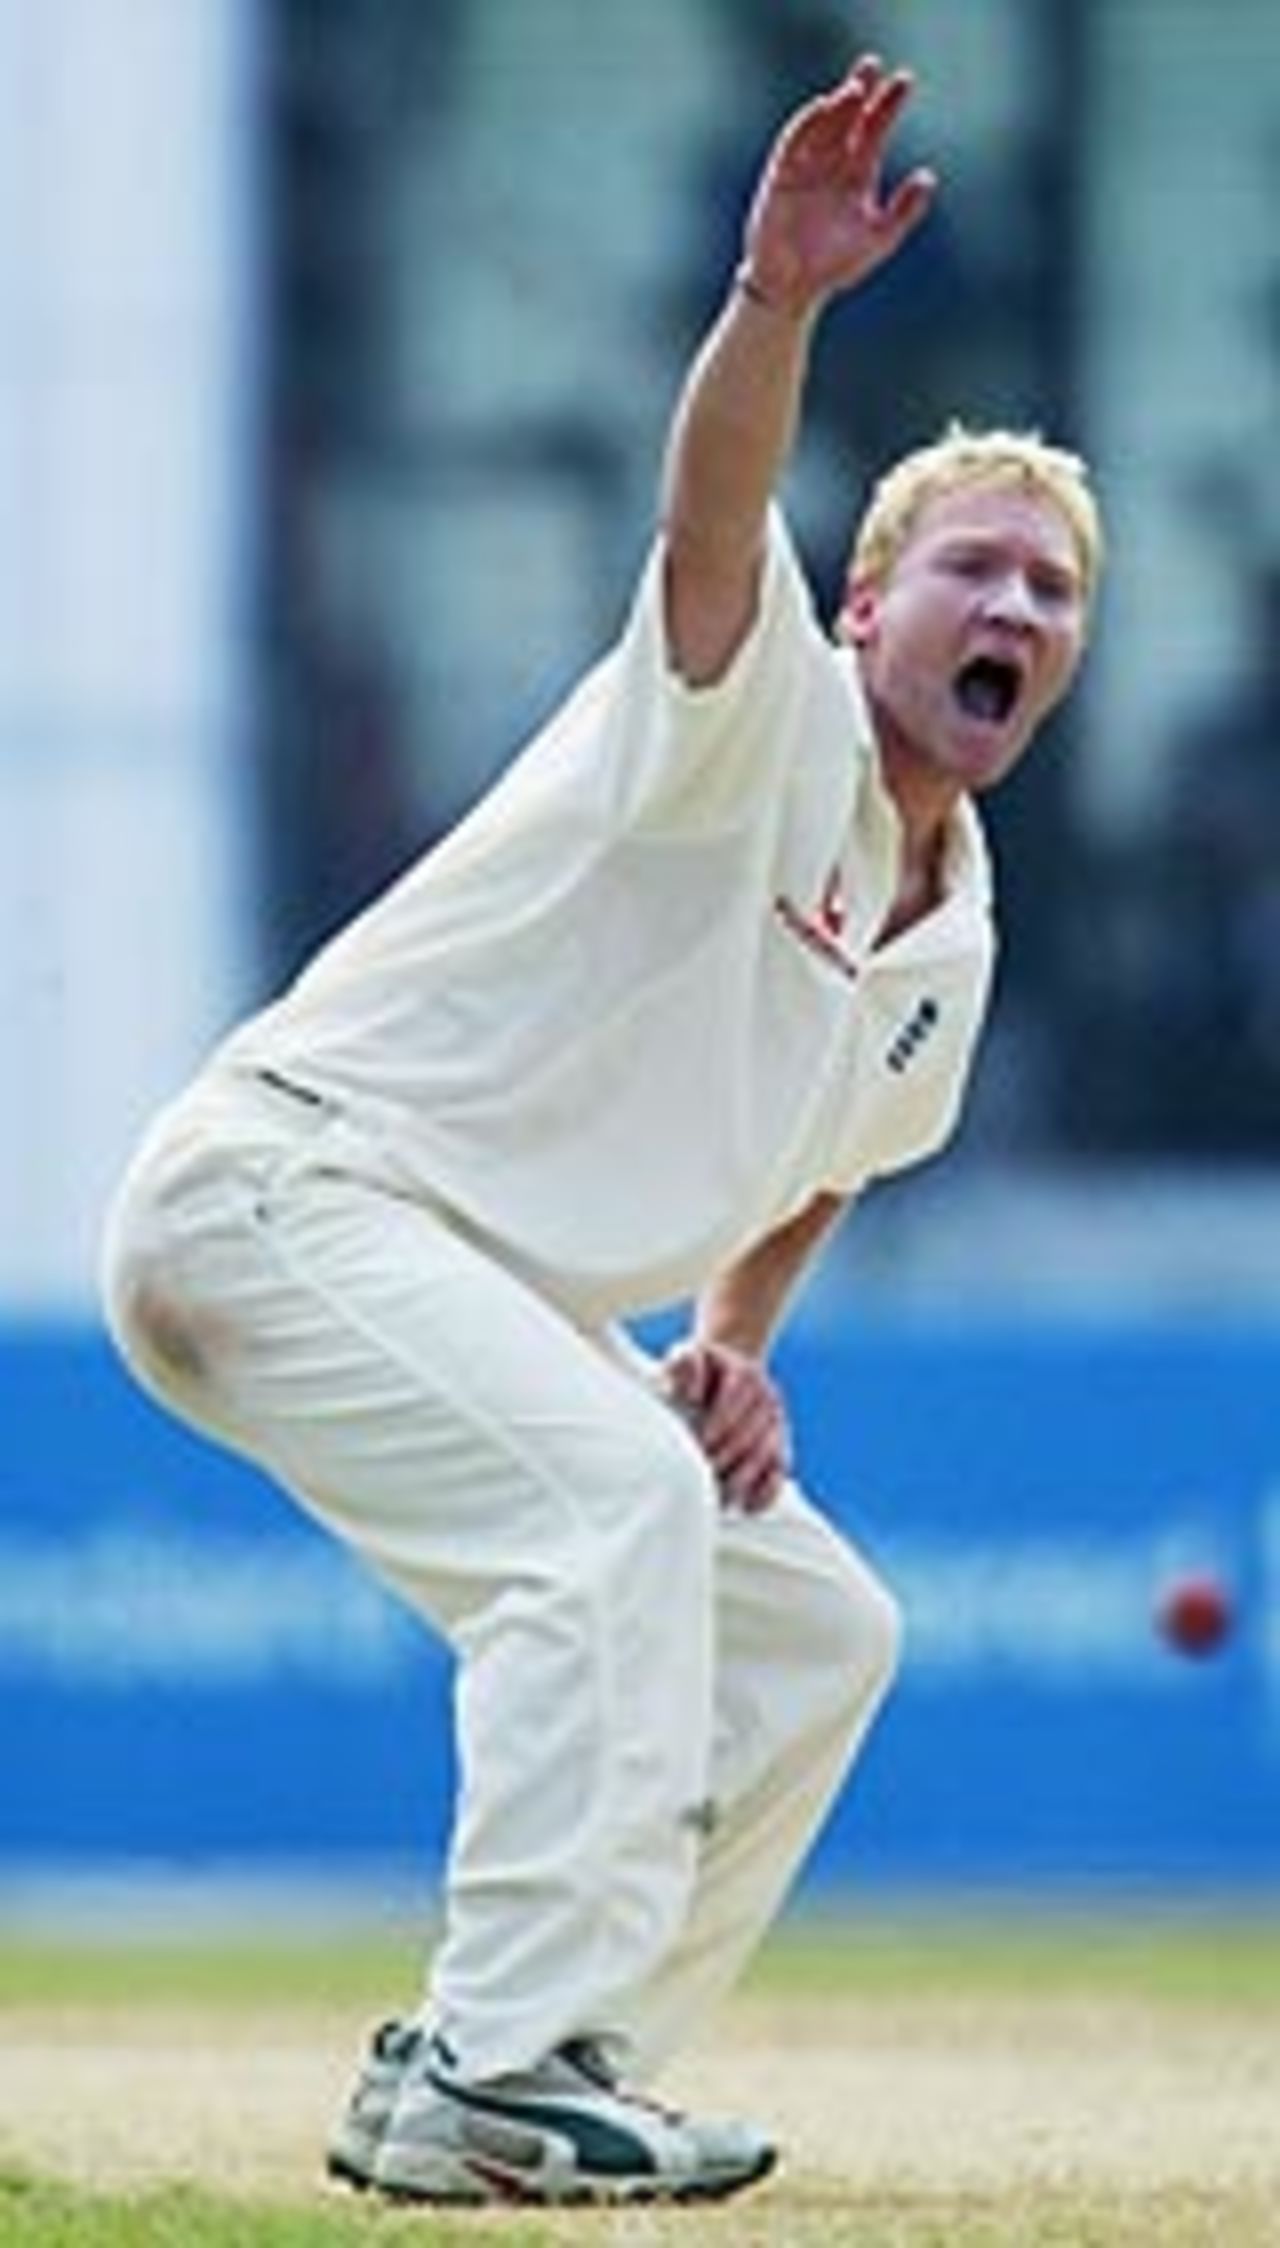 Gareth Batty - England's off-spinner in the Caribbean